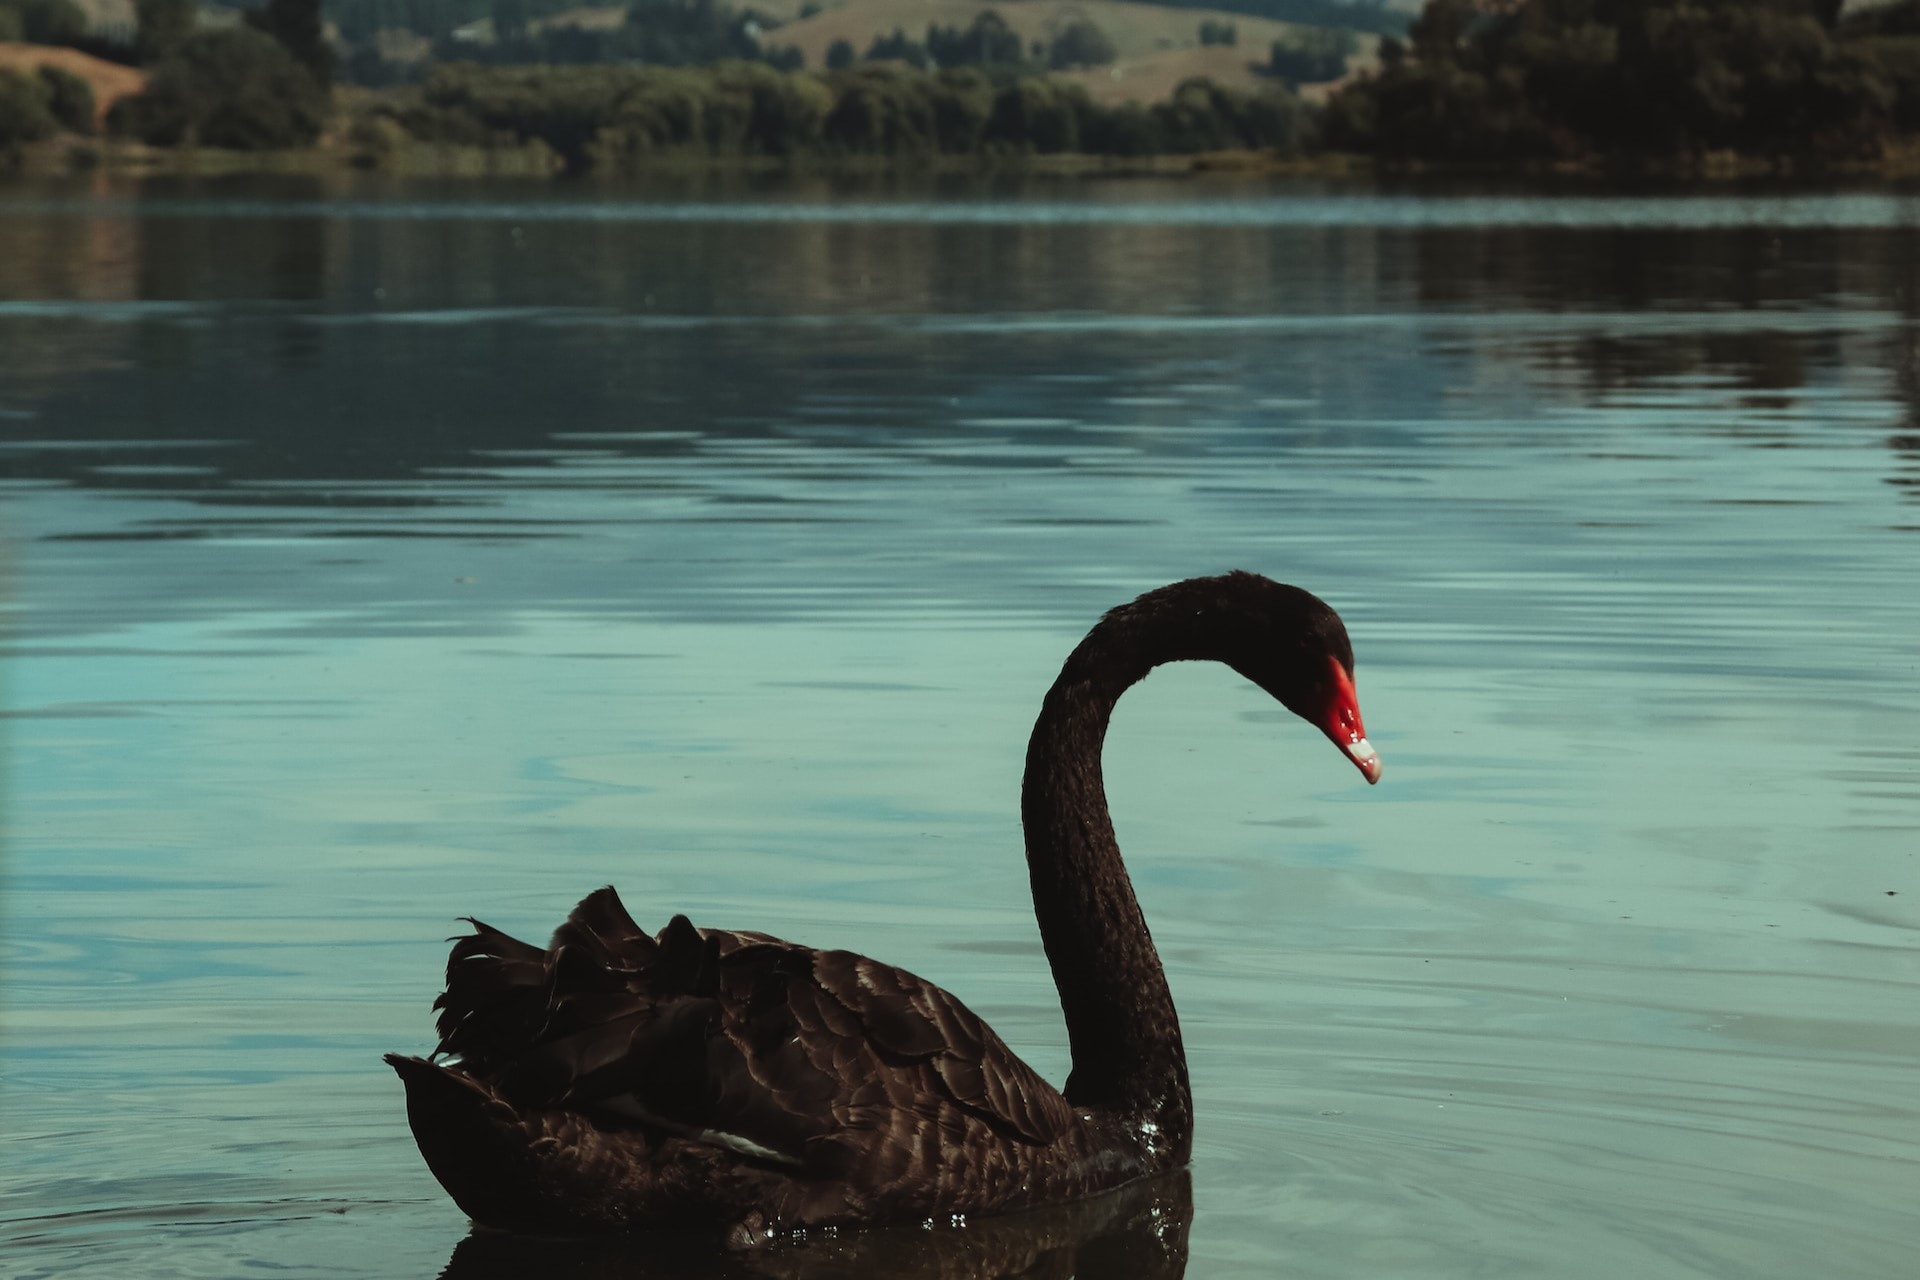 Beware of the "black swan"! - Prepare for the impossible